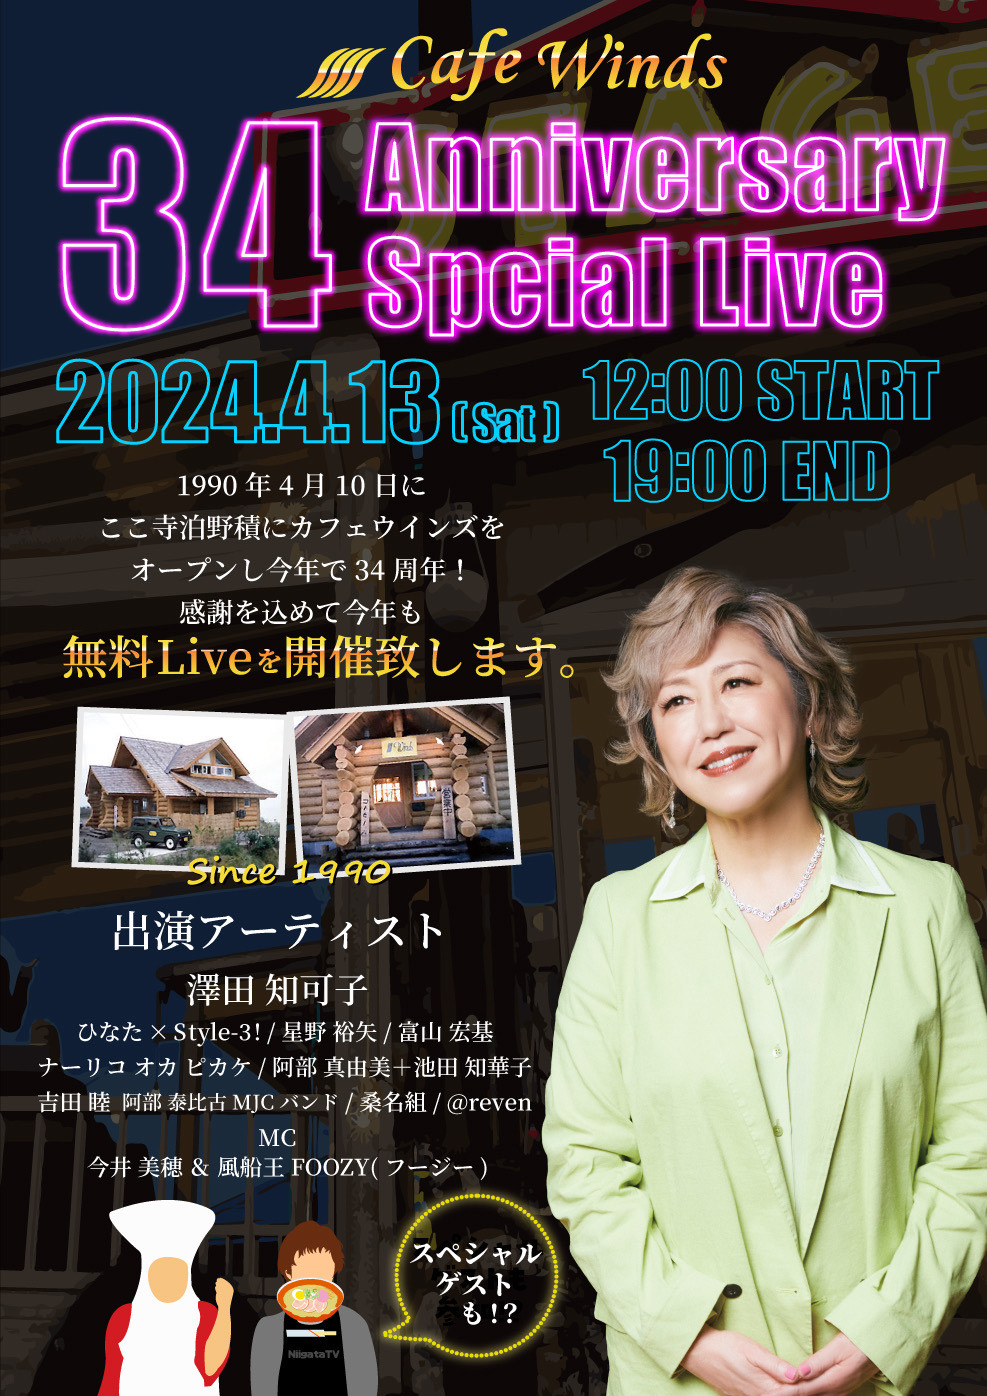 Cafe Winds 34 Anniversary Live